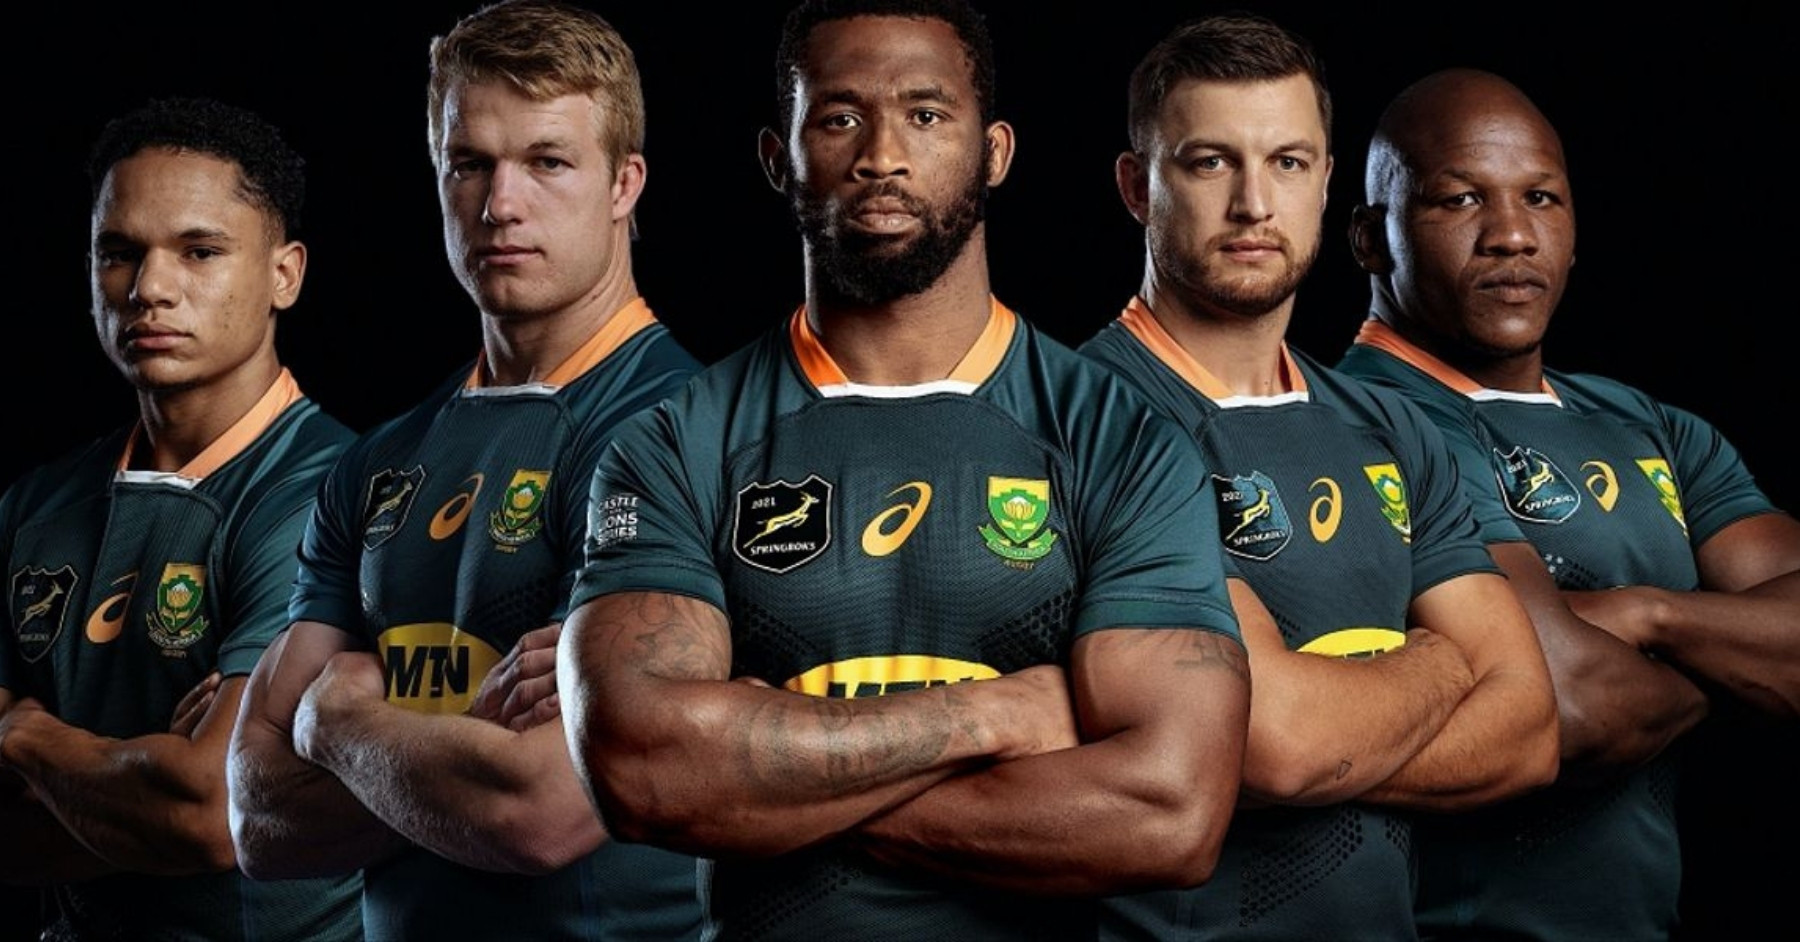 Portret bellen autobiografie Excitement builds for SA 'A' team's two-match tour - Huge Rugby News